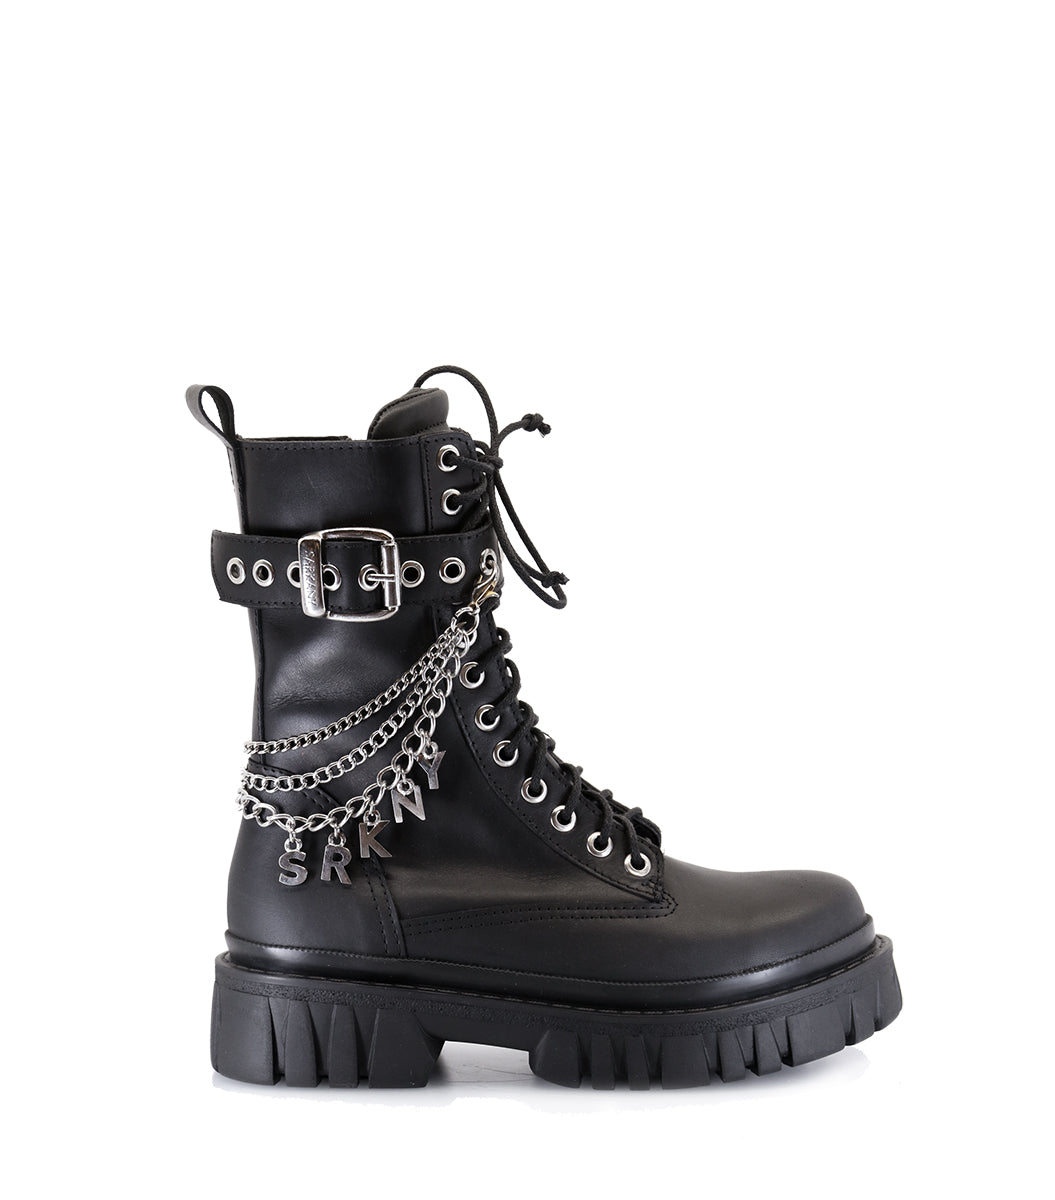 PALY BLACK COMBAT BOOTS